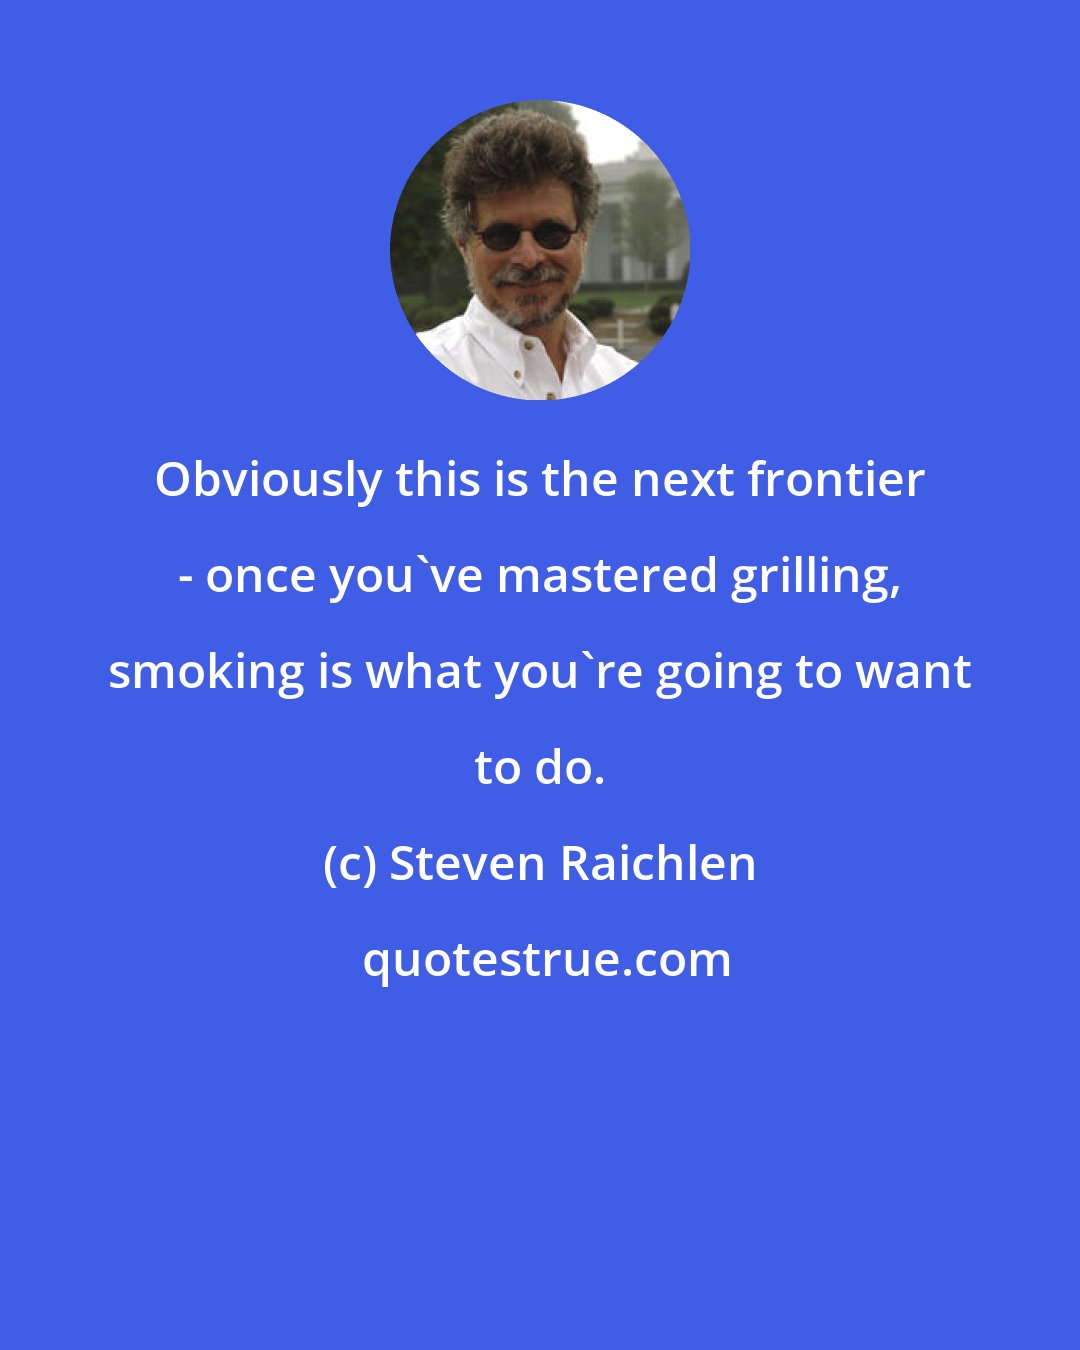 Steven Raichlen: Obviously this is the next frontier - once you've mastered grilling, smoking is what you're going to want to do.